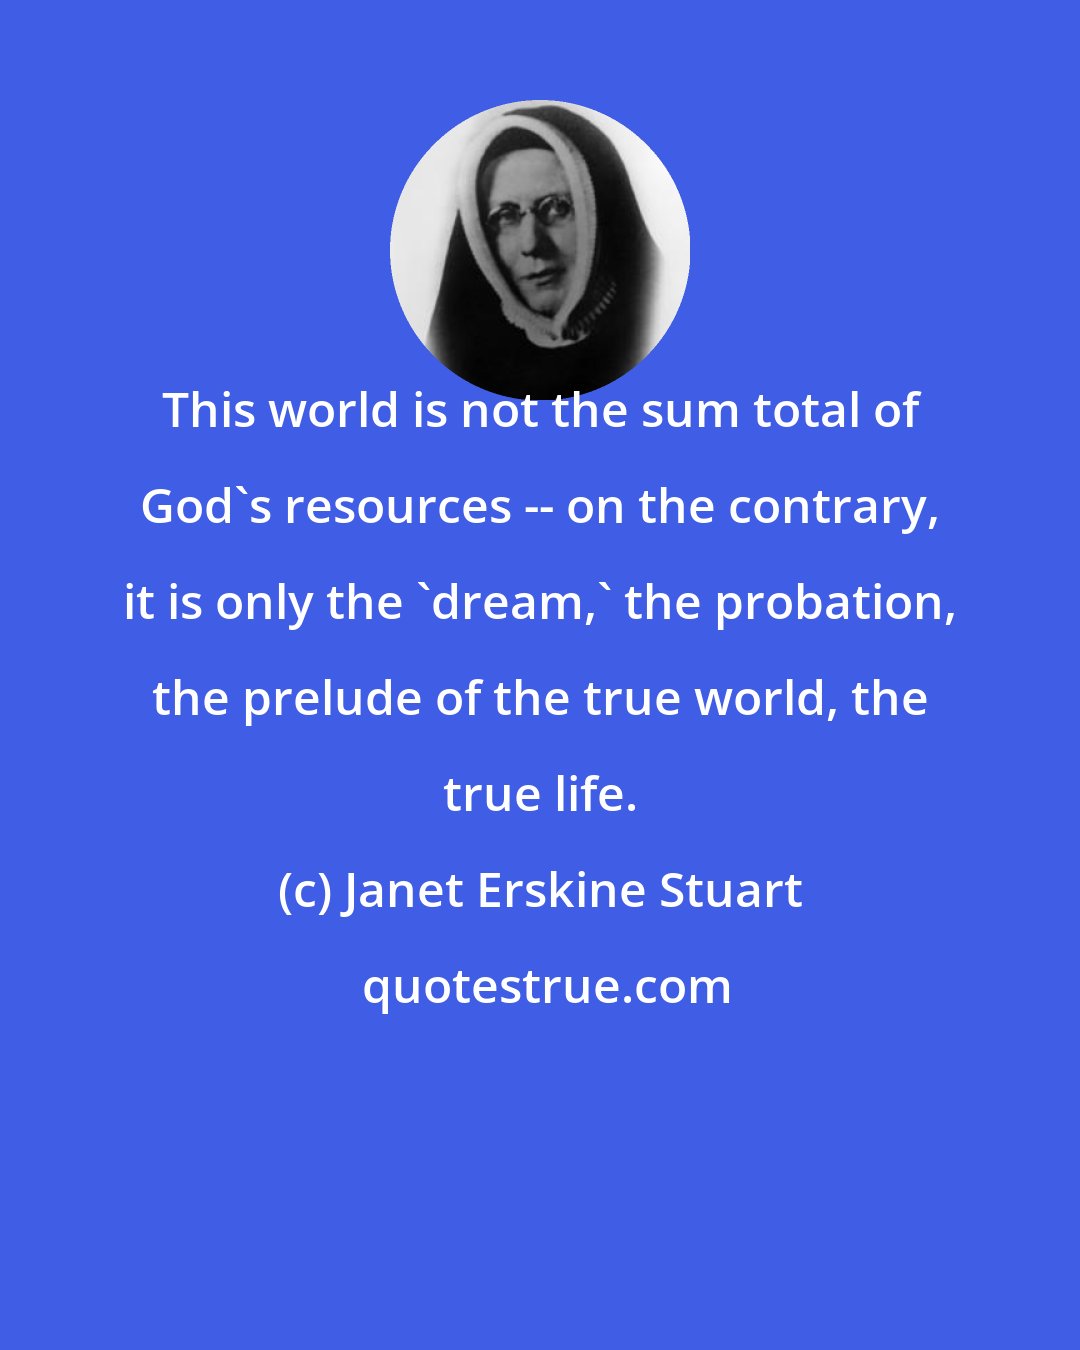 Janet Erskine Stuart: This world is not the sum total of God's resources -- on the contrary, it is only the 'dream,' the probation, the prelude of the true world, the true life.